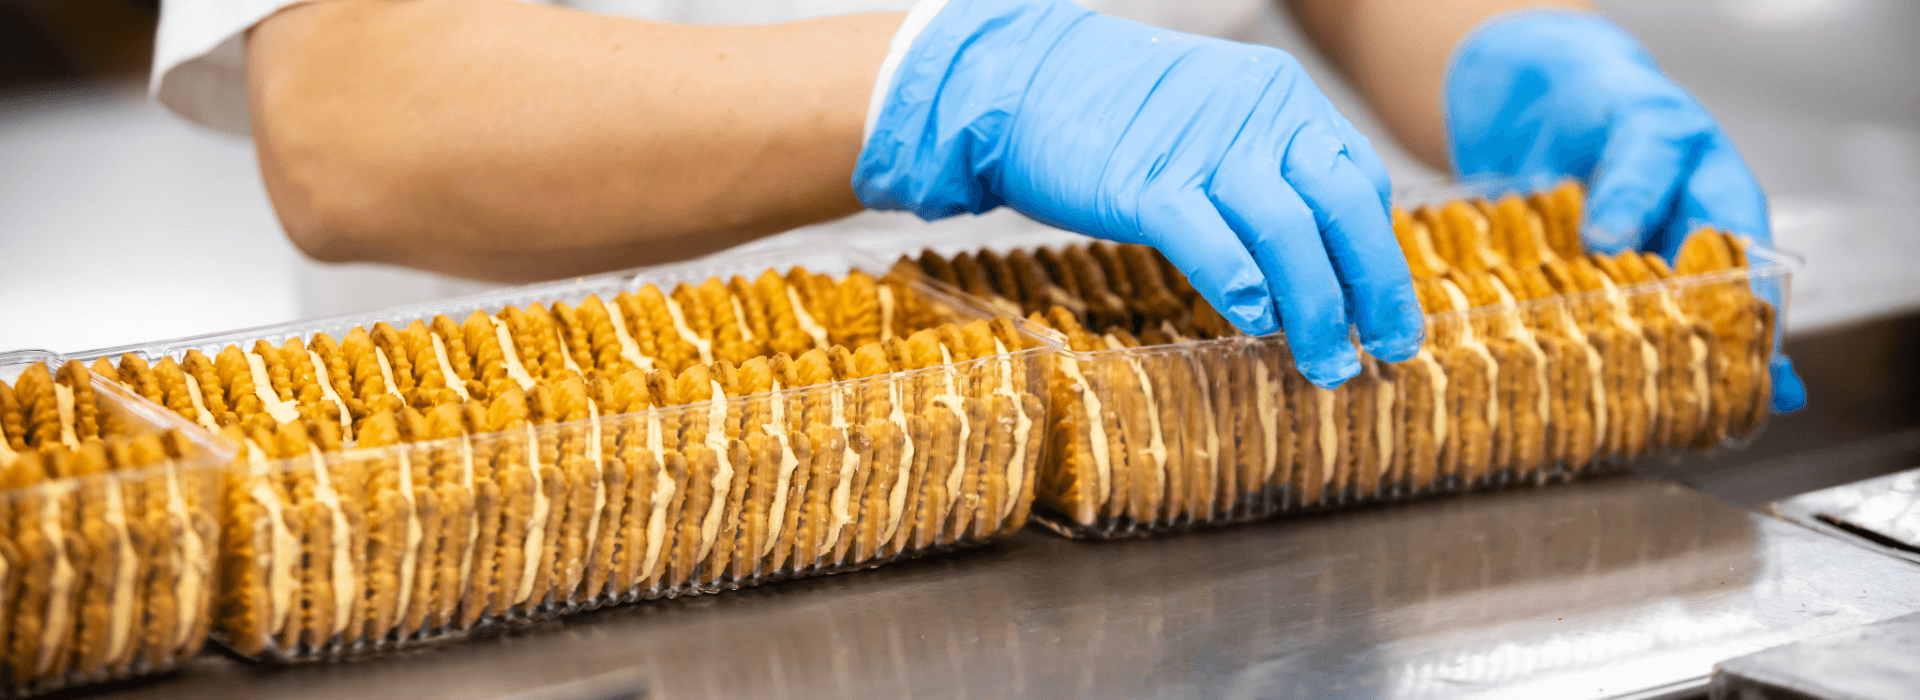 cookie packaging and quality inspection